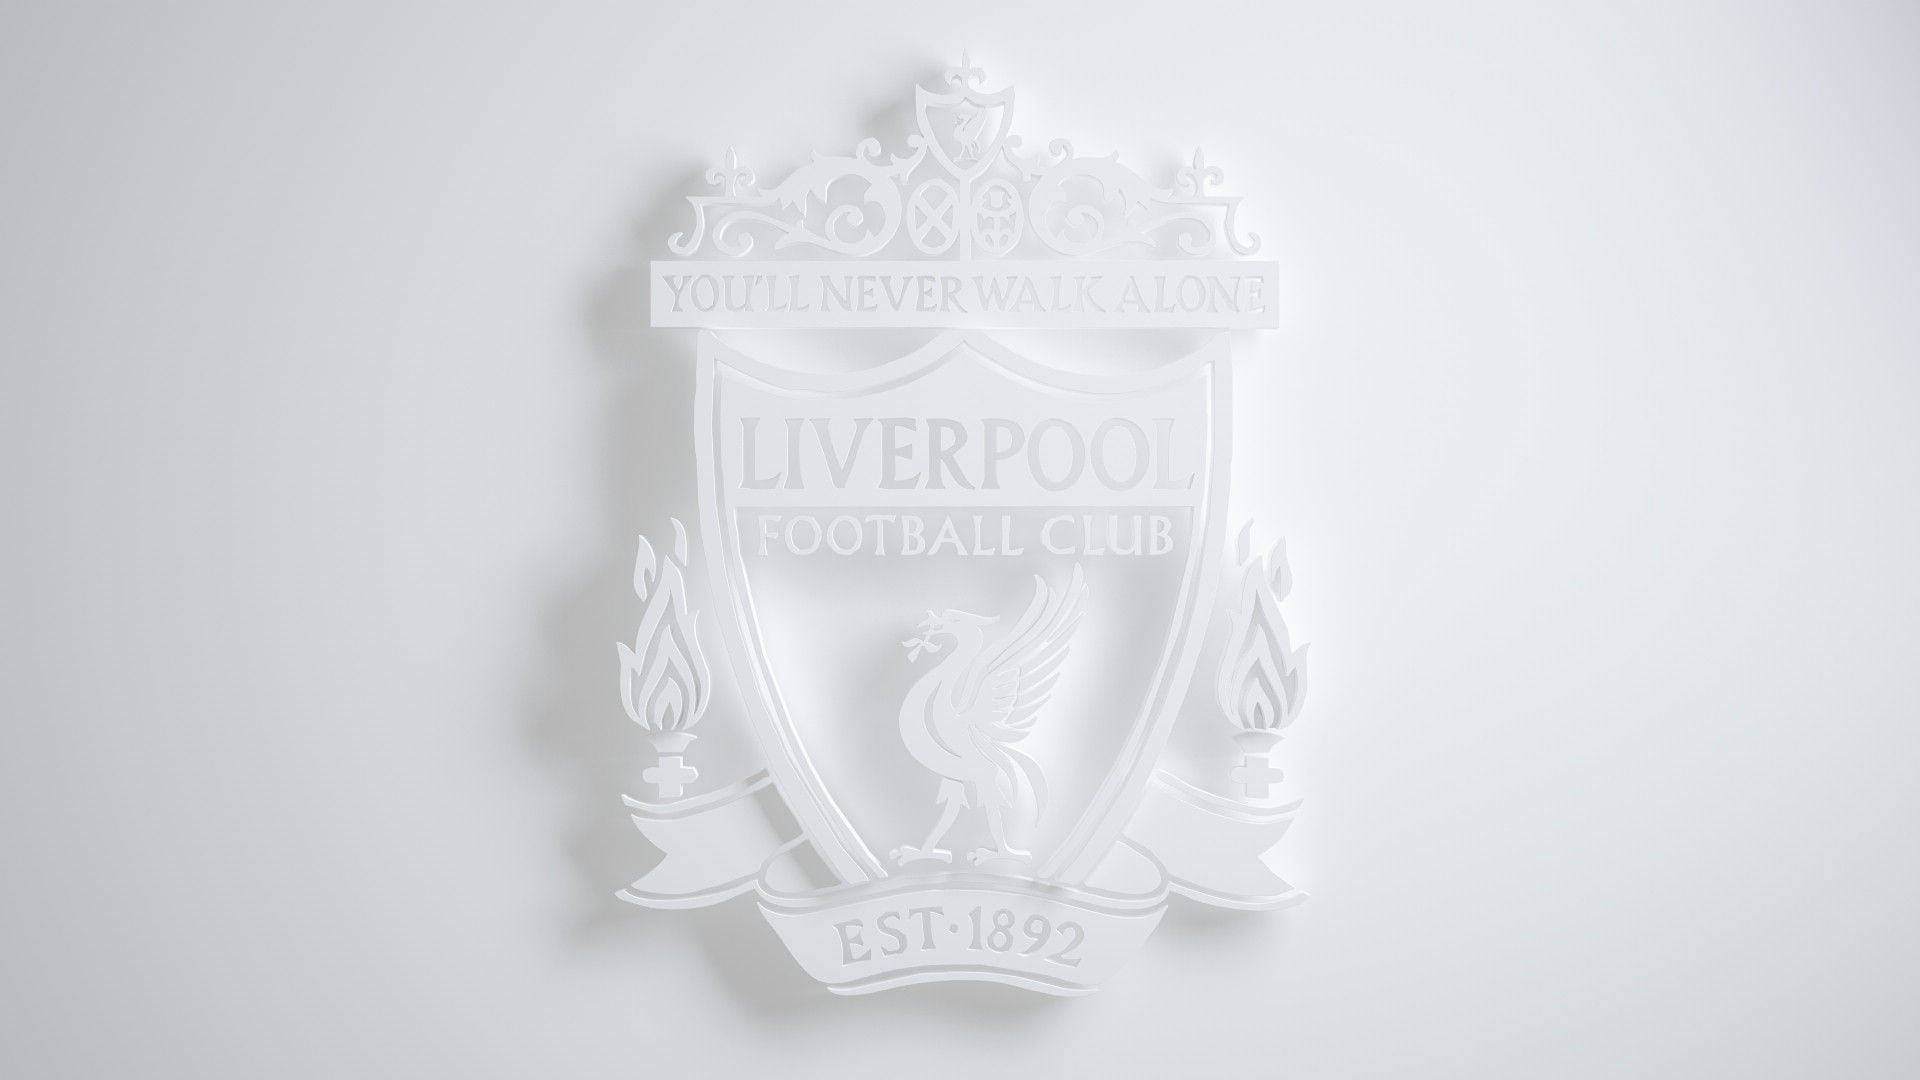 Liverpool Football Club In Cool White Background